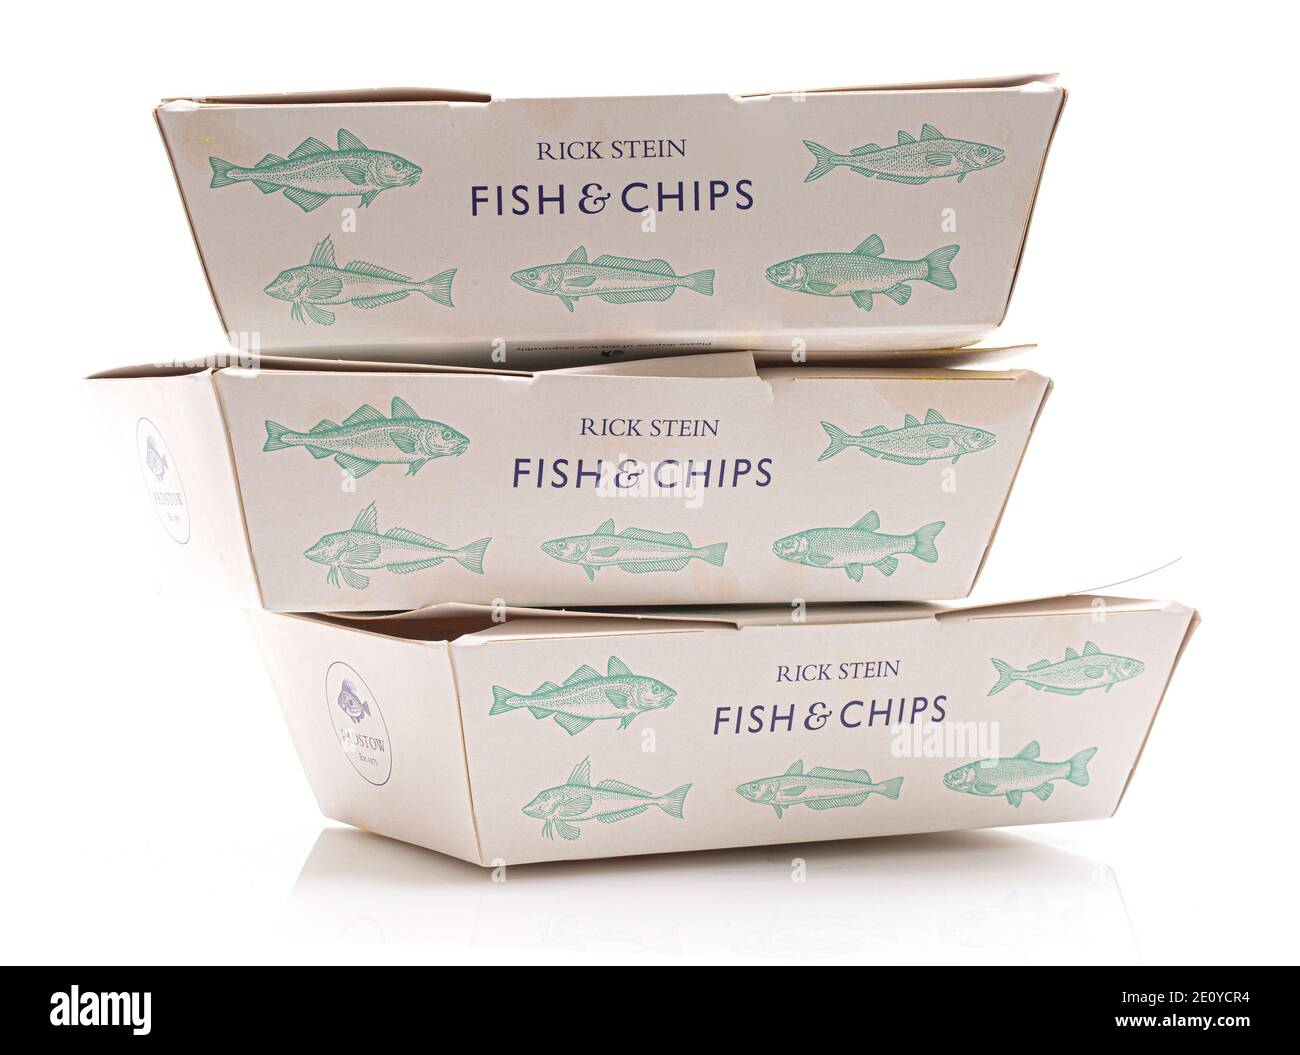 SWINDON, UK - JANUARY 2, 2021: 3 Used Fish & Chip take a way boxes from Rick Steins restaurant Stock Photo